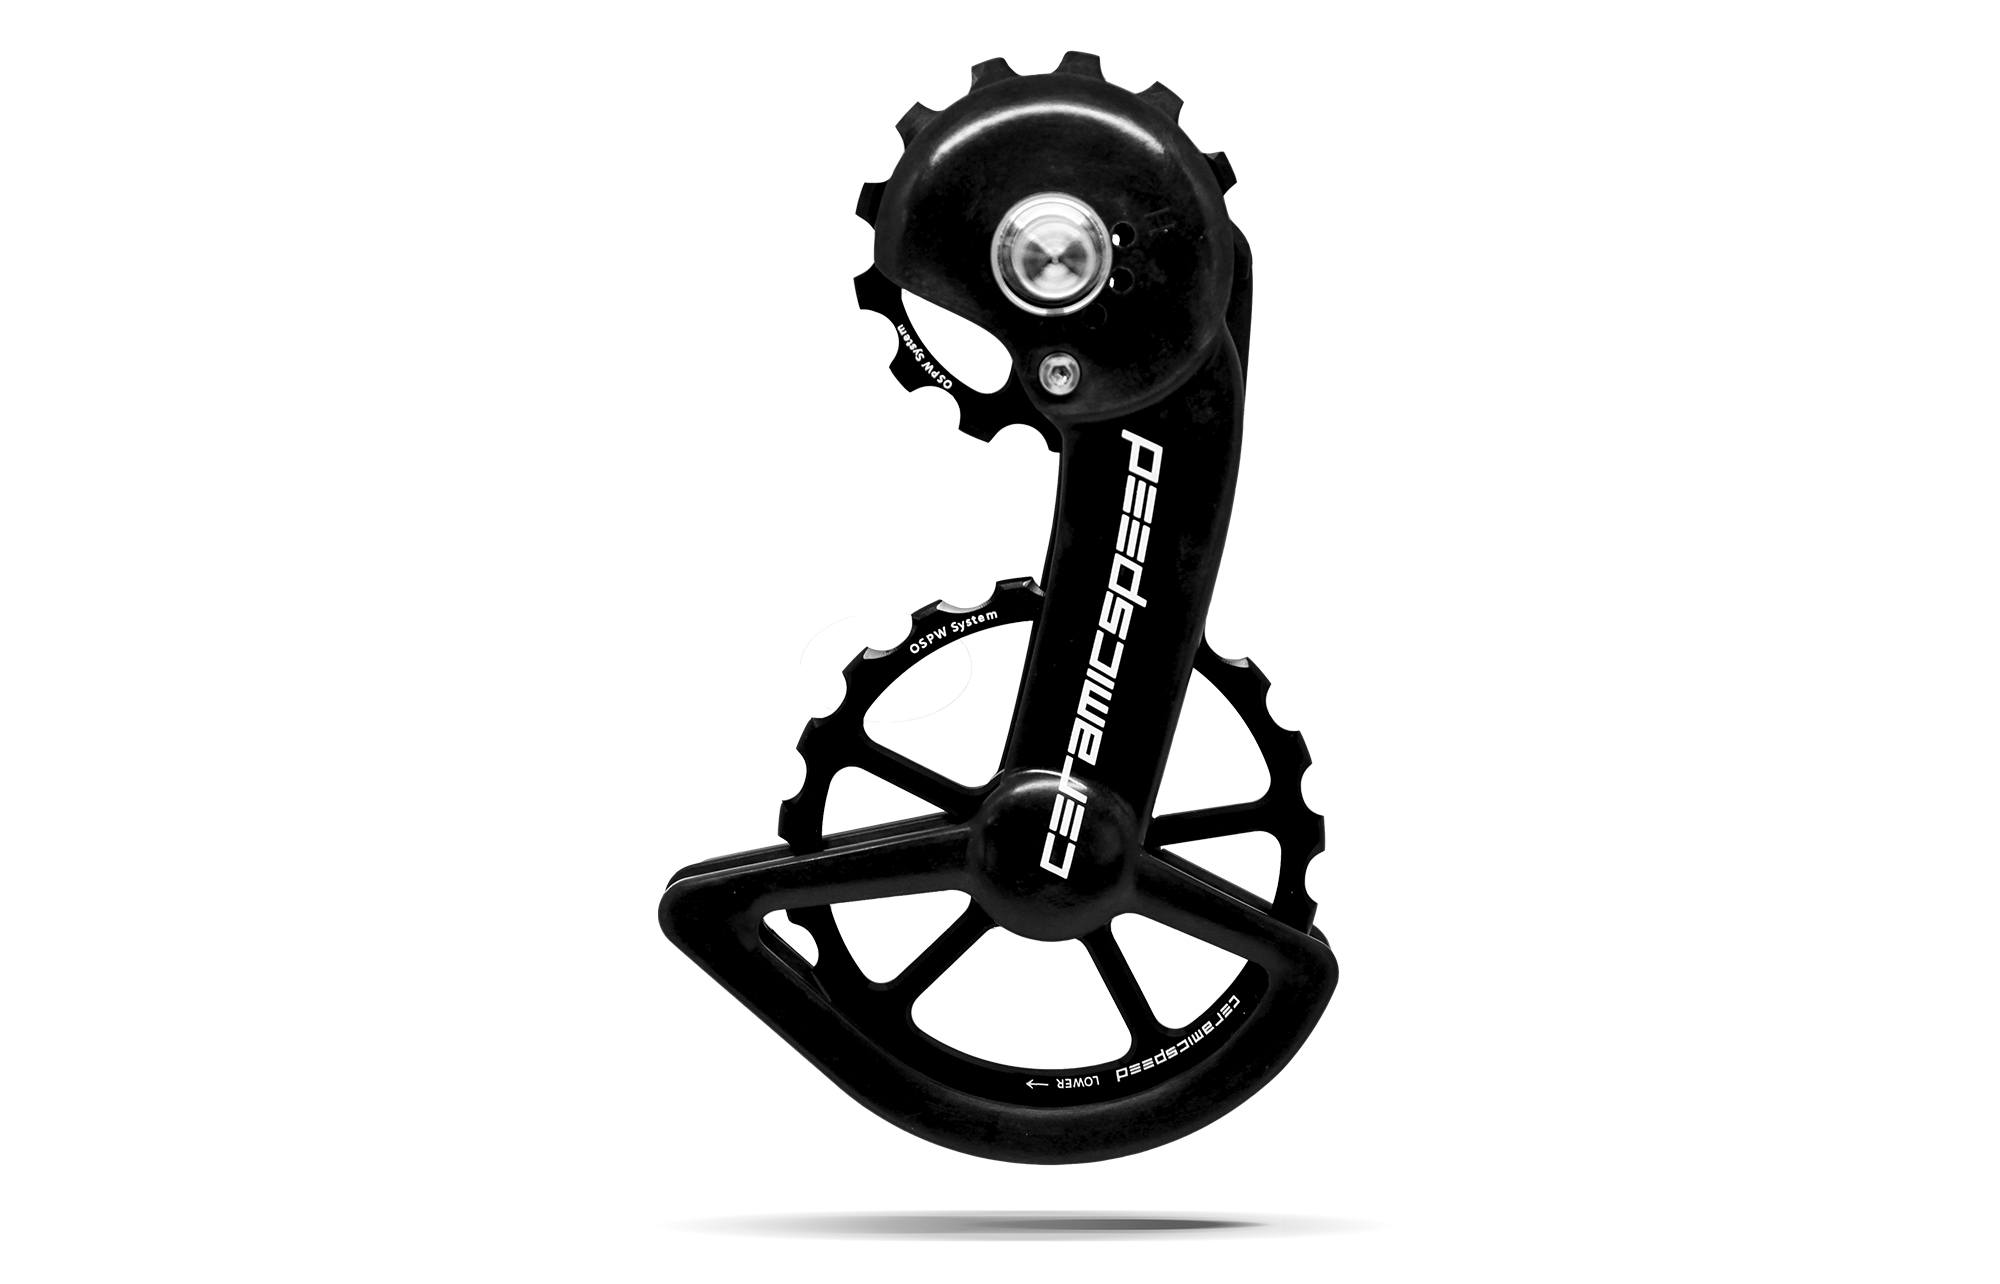 CeramicSpeed Oversized Pulley Wheel System for Shimano 9100/9150/8000/8050 SS